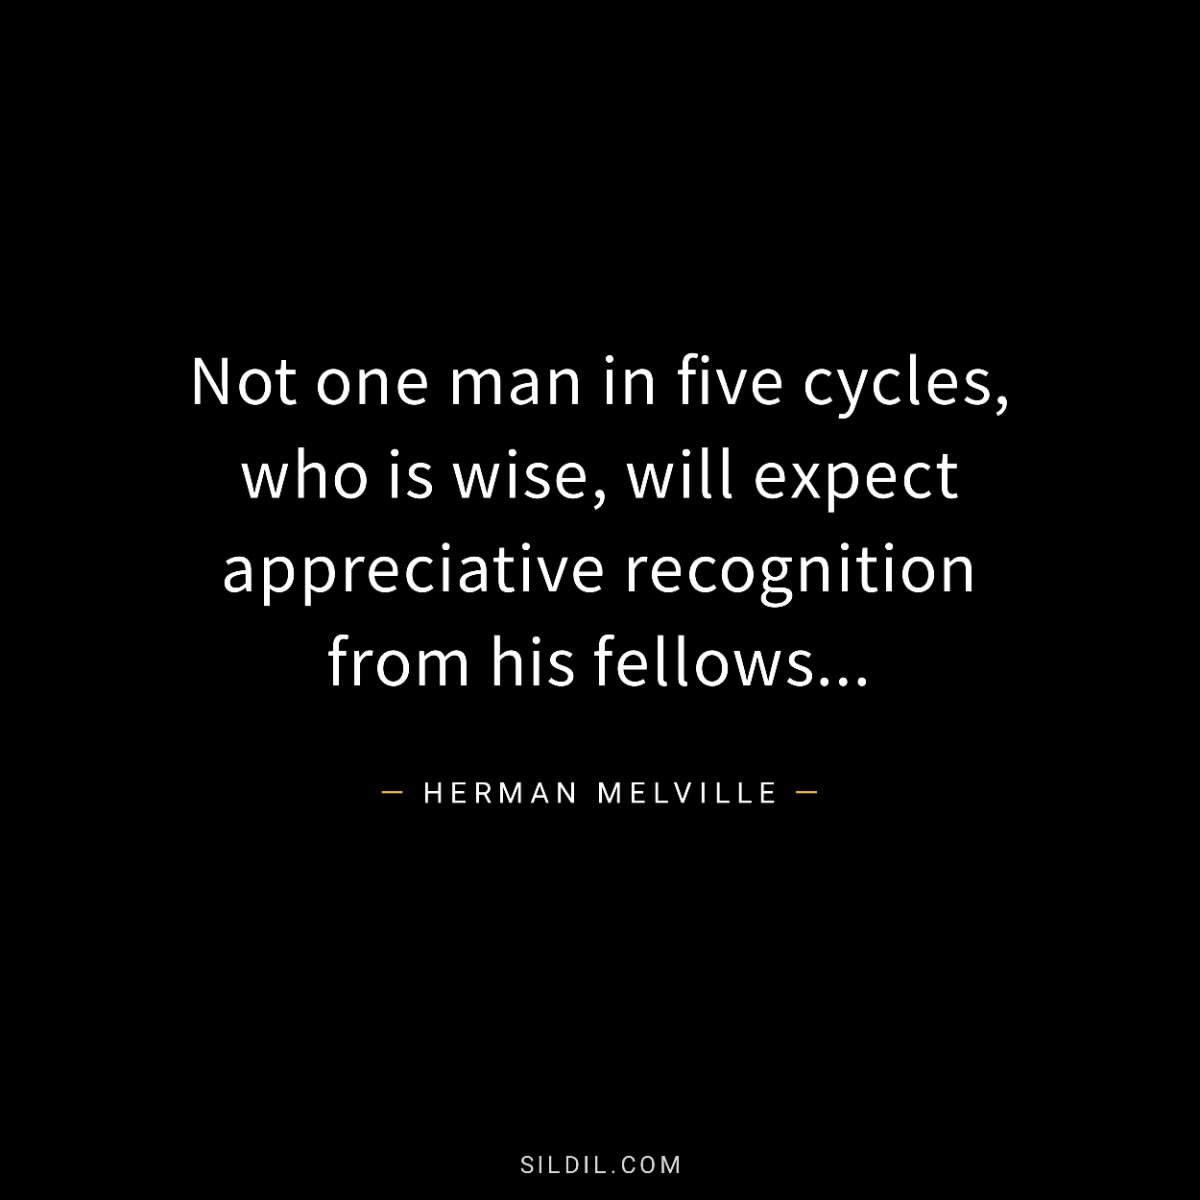 Not one man in five cycles, who is wise, will expect appreciative recognition from his fellows...